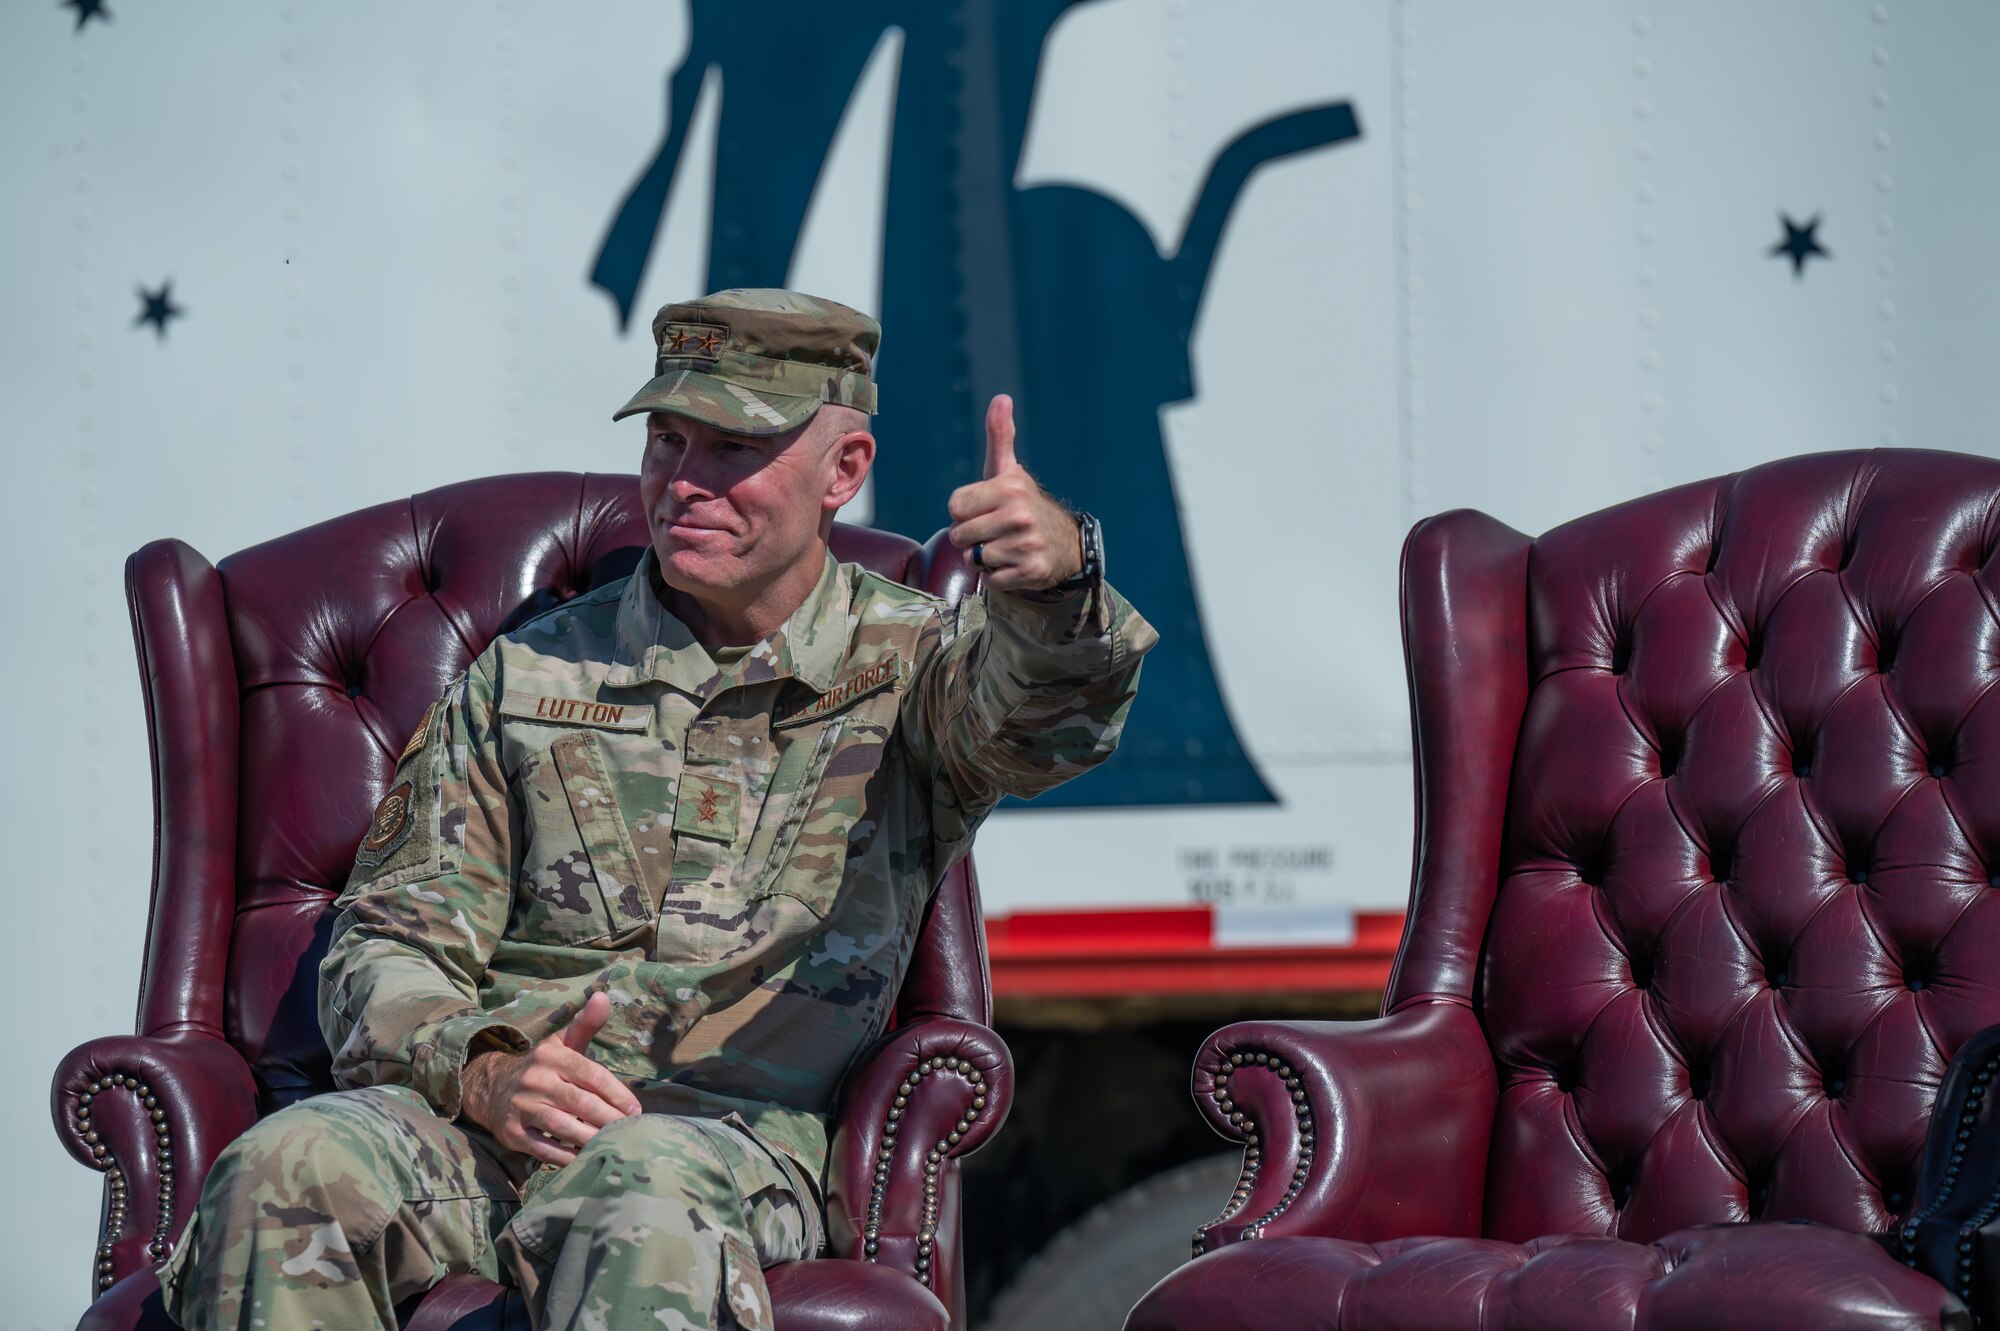 Maj. Gen. Michael Lutton, 20th Air Force commander, gives a thumbs up during the 341st Missile Wing change of command ceremony July 18, 2022 at Malmstrom Air Force Base, Mont.